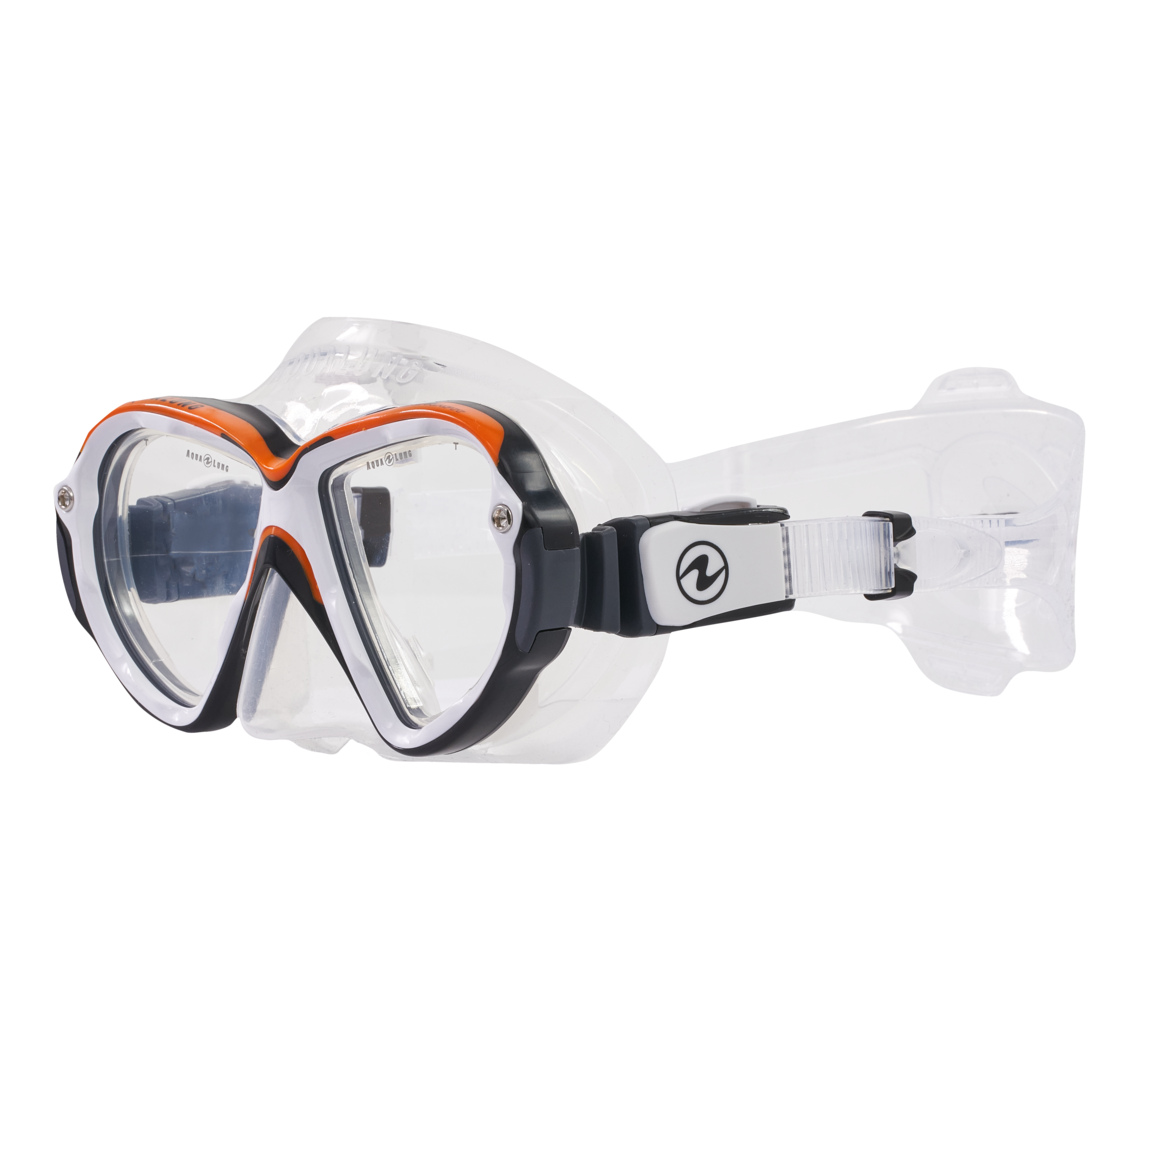 MS5350809M_REVEAL UltraFit Orange – white – Clear sil_01_right